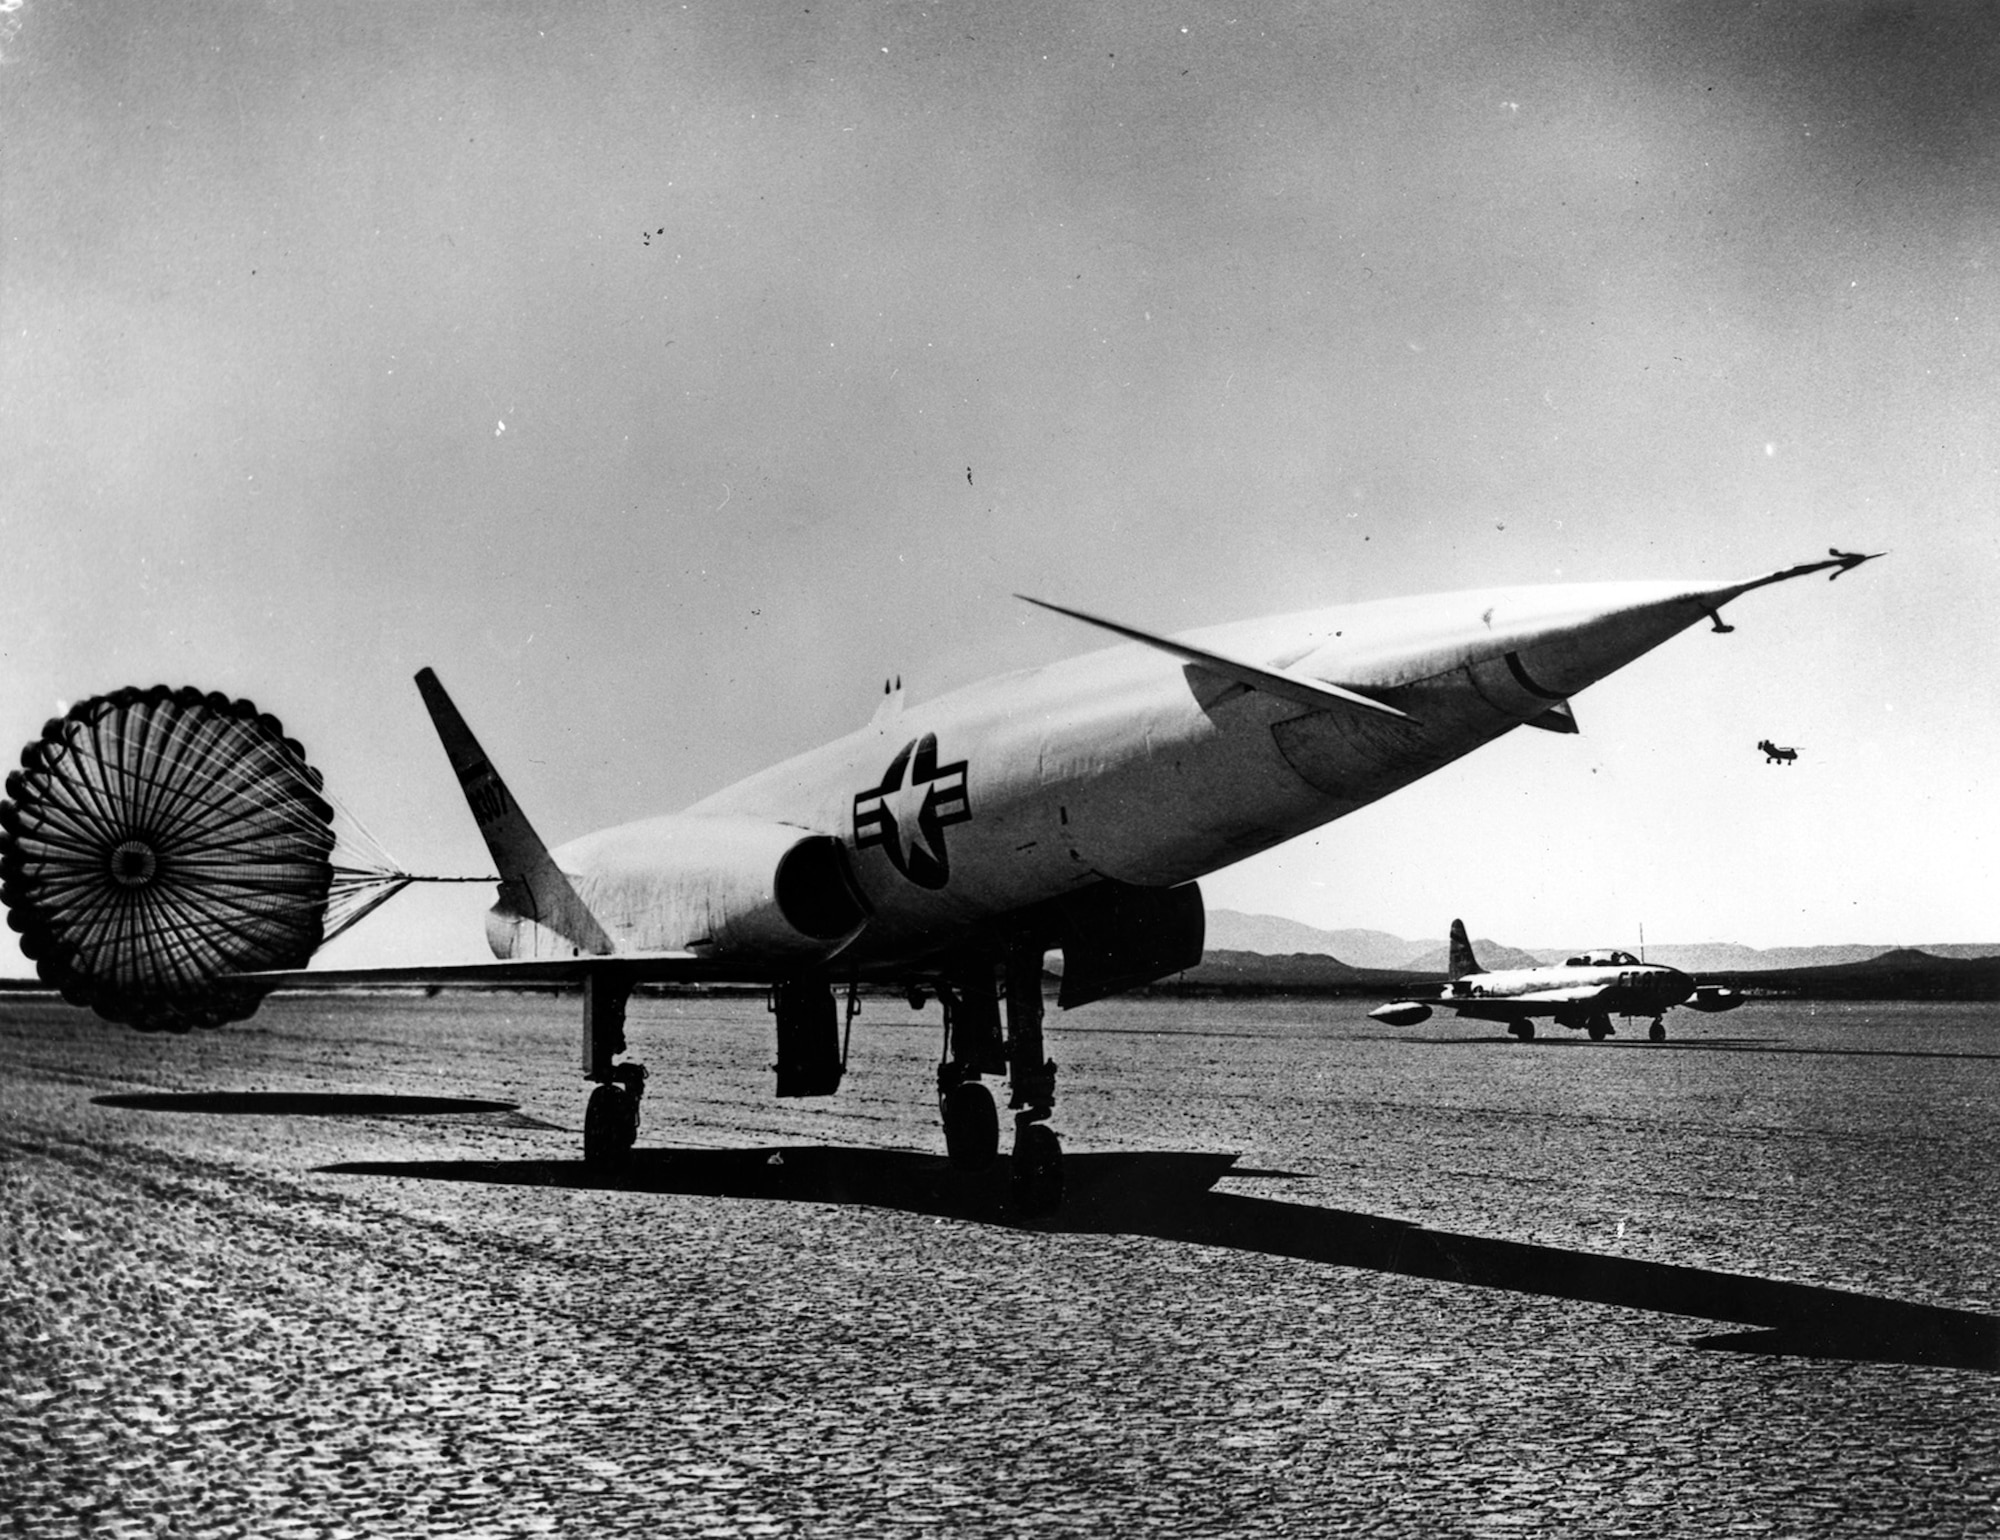 The X-10 took off and landed on its own undercarriage and deployed a parachute to shorten its landing roll. (U.S. Air Force photo)